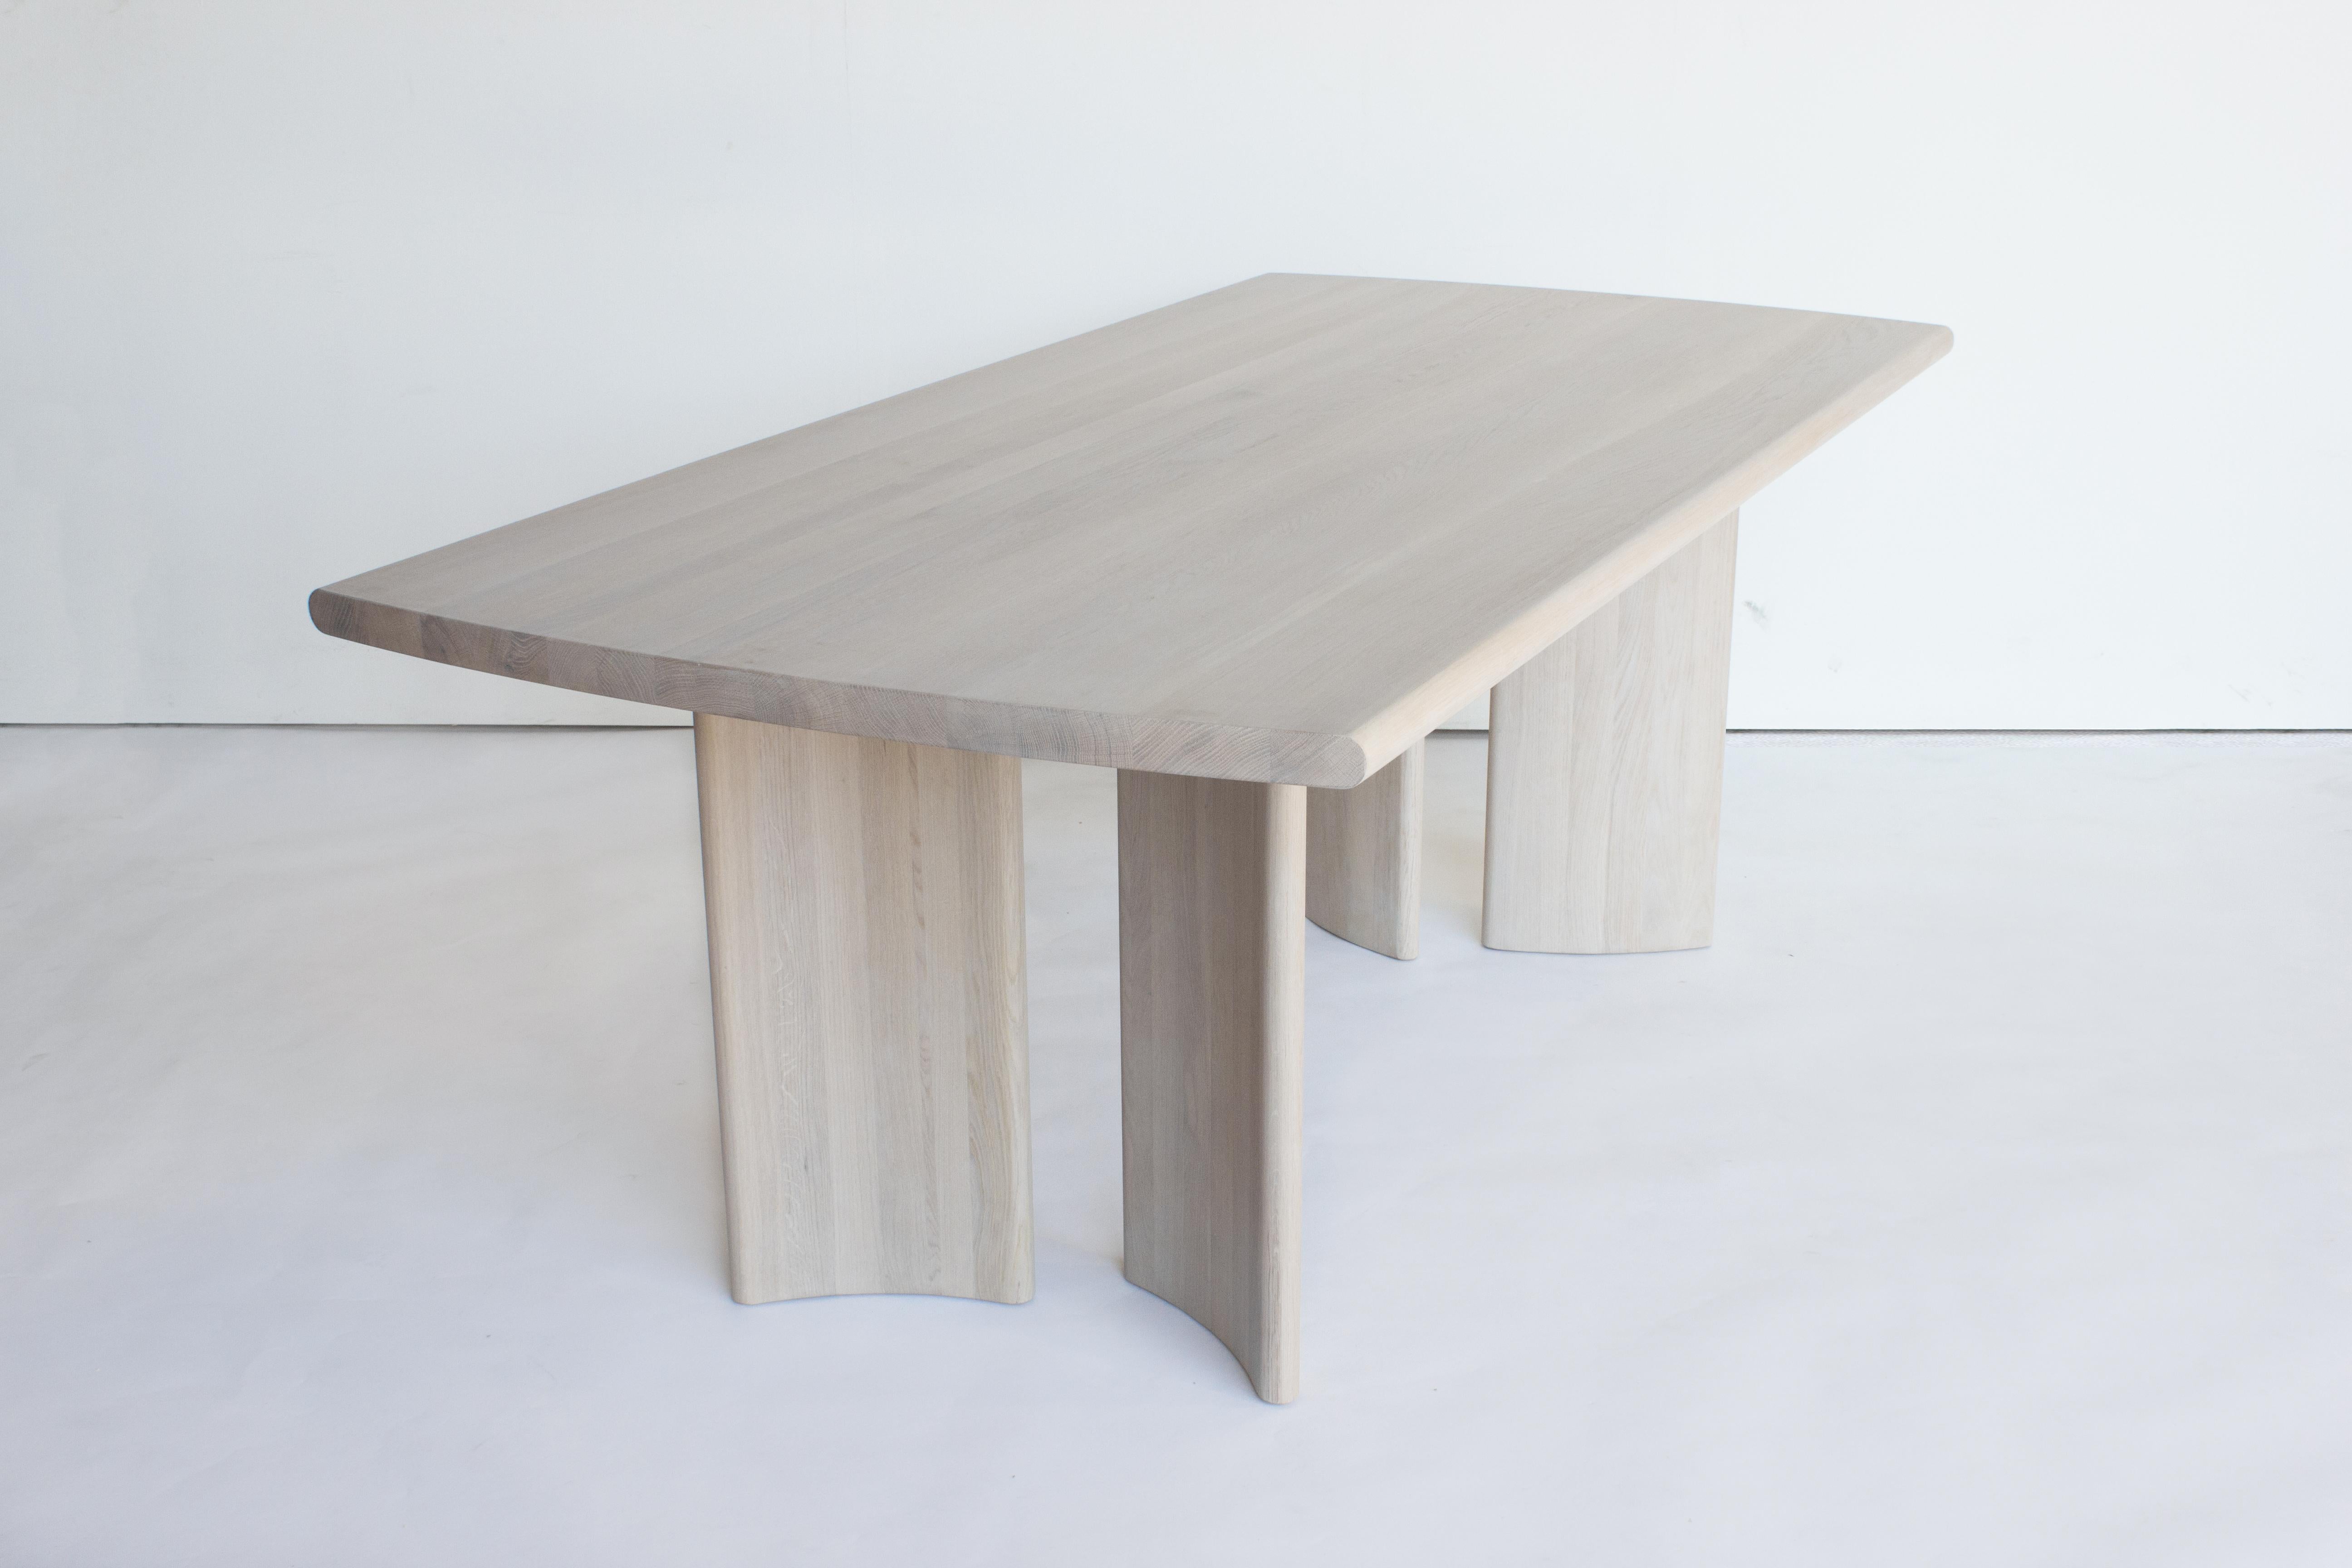 Contemporary Crest Table by Sun at Six, Nude, Minimalist Dining Table in Wood